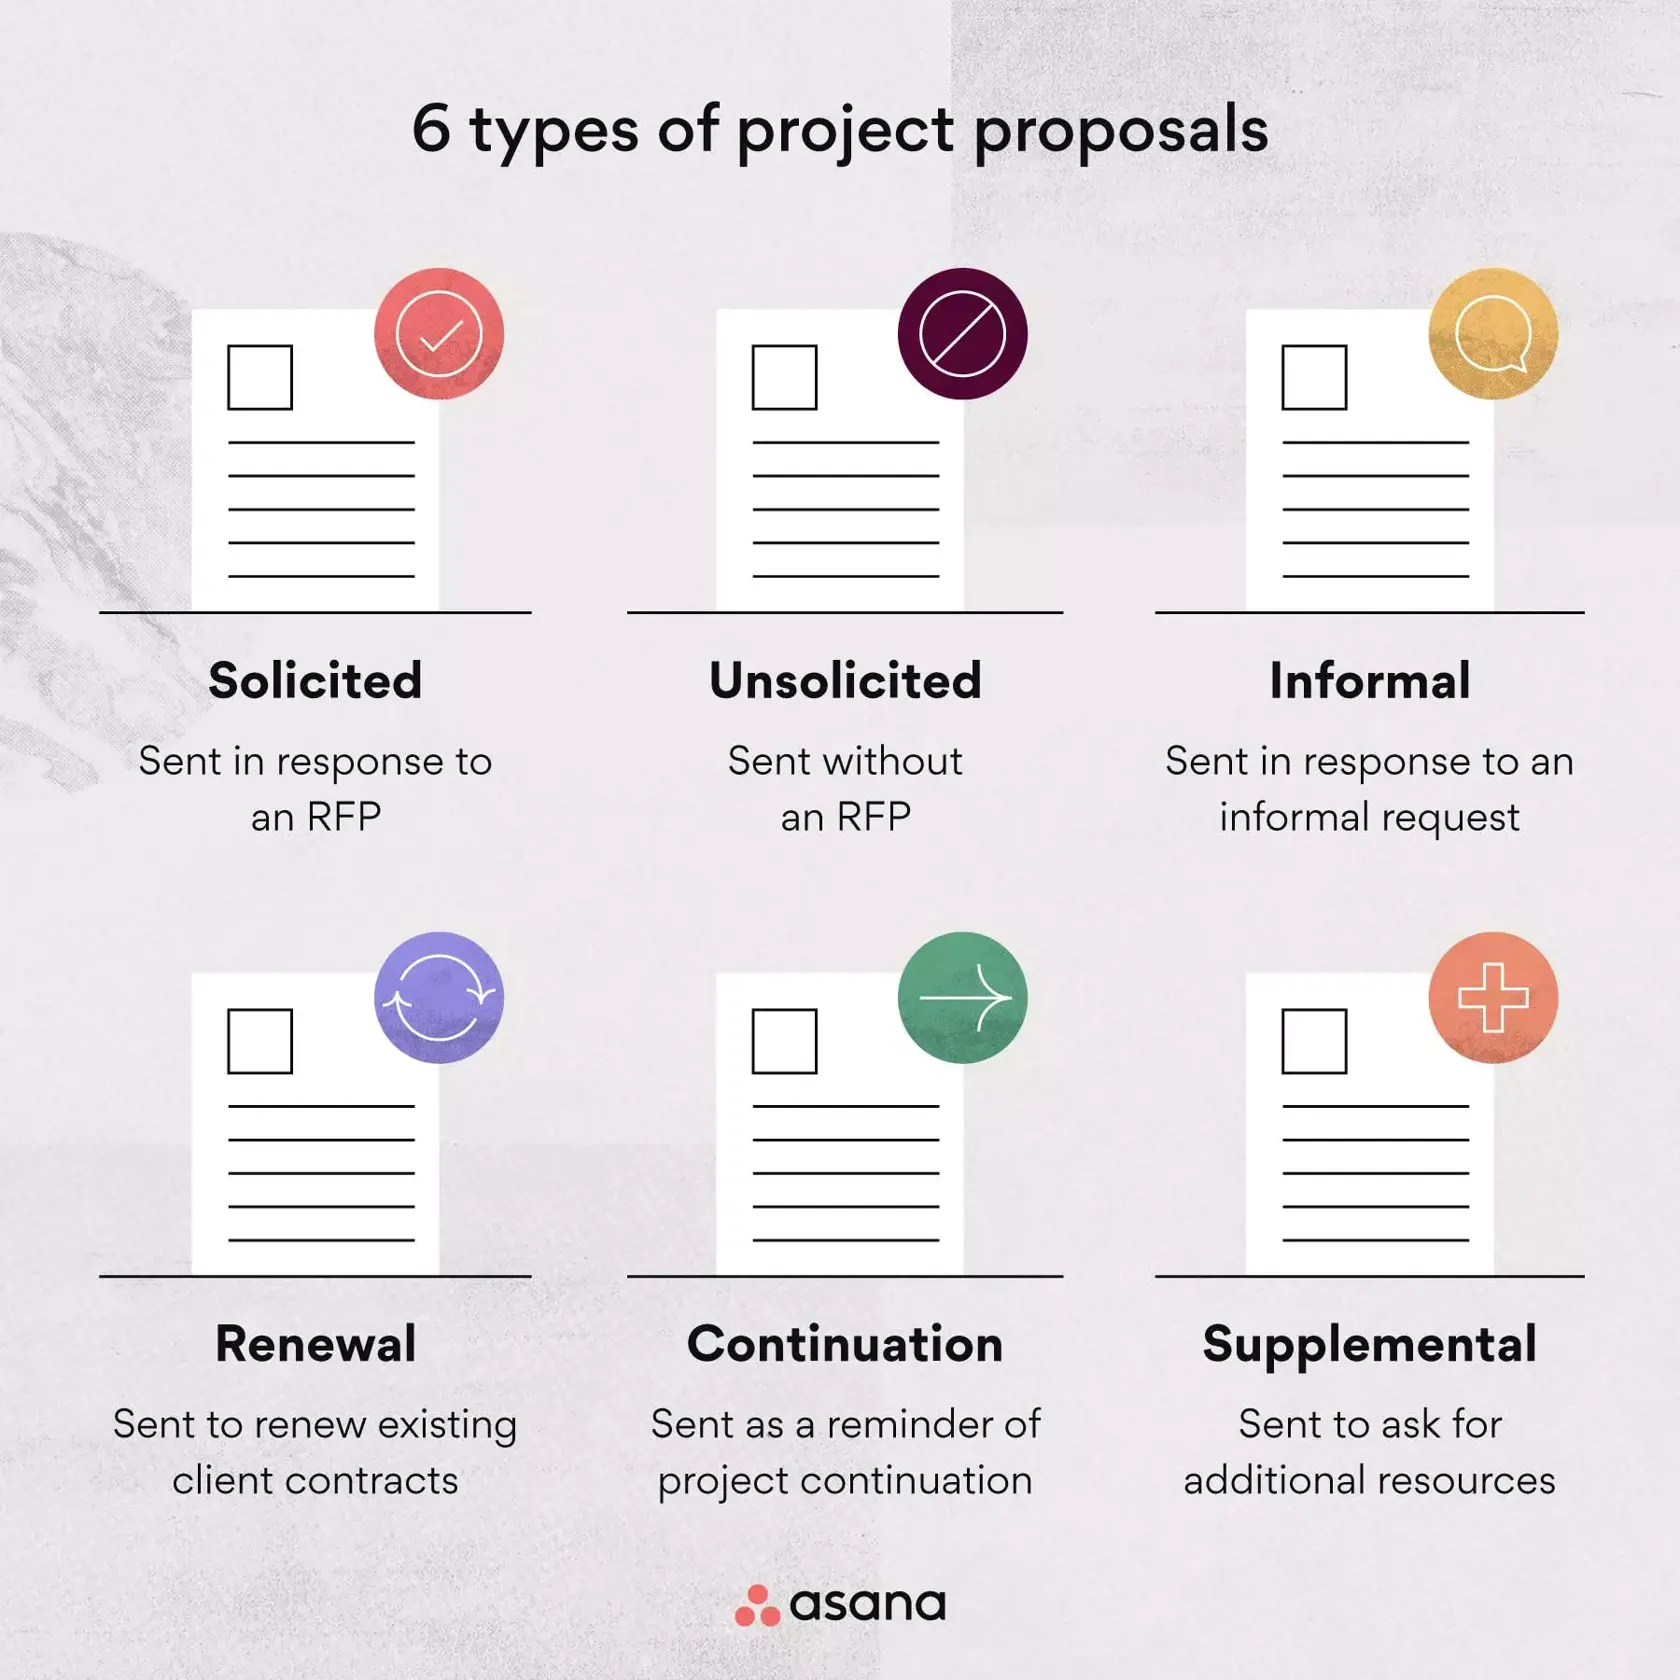 [inline illustration] Types of project proposals (infographic)